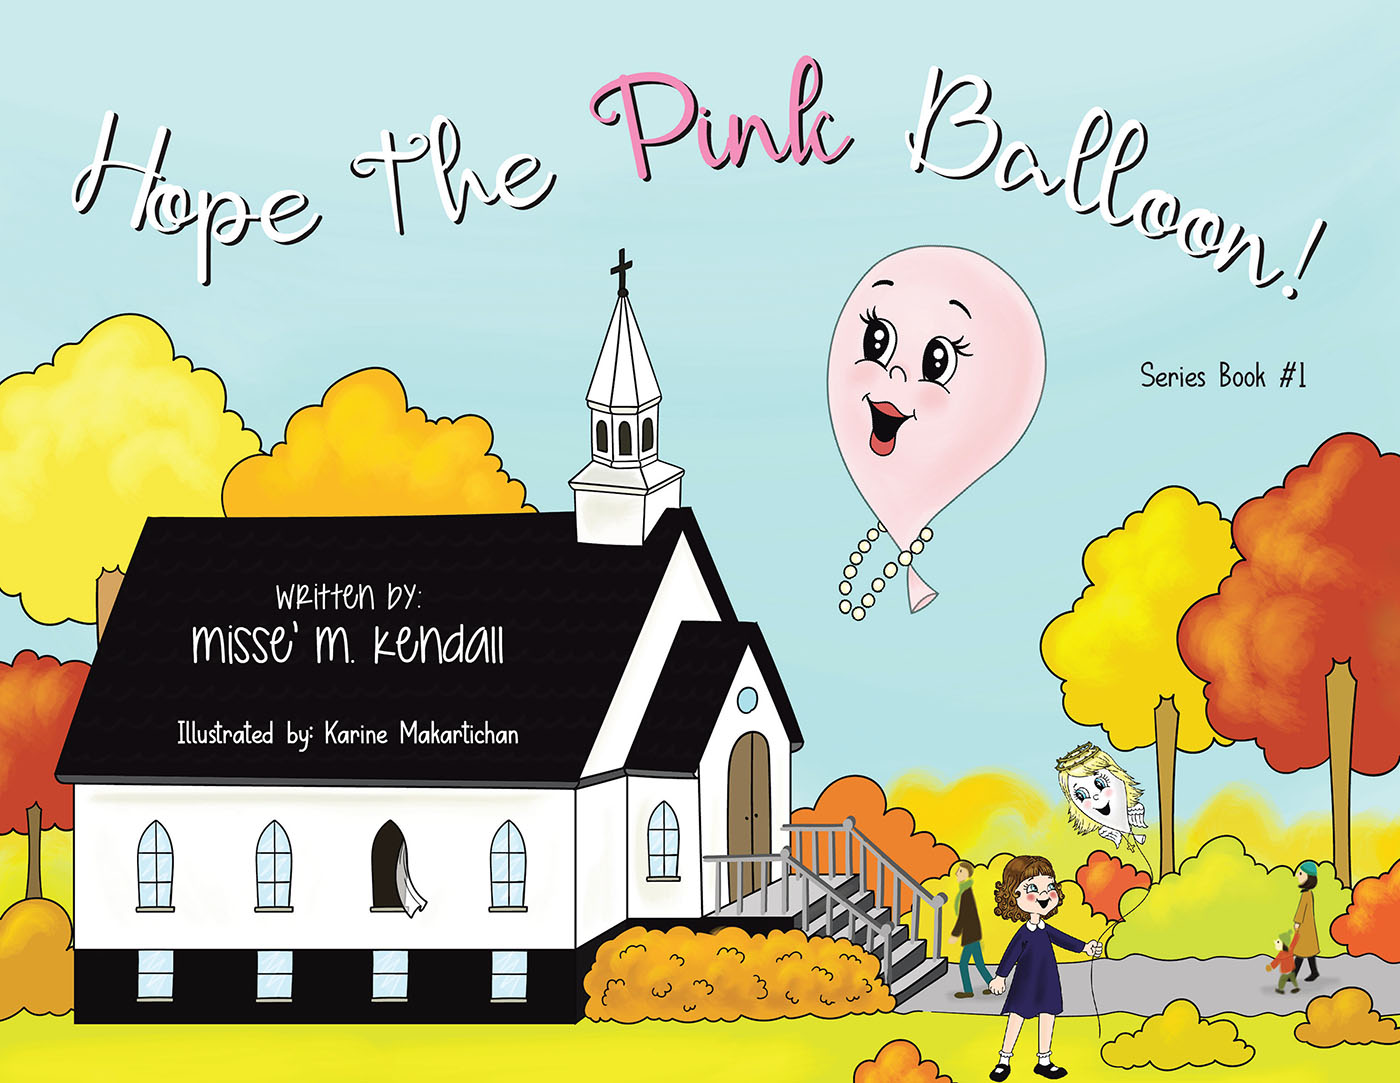 Missé M. Kendall’s Newly Released “Hope the Pink Balloon!” is a Charming Tale of Friendship, Kindness, and Lessons of Faith